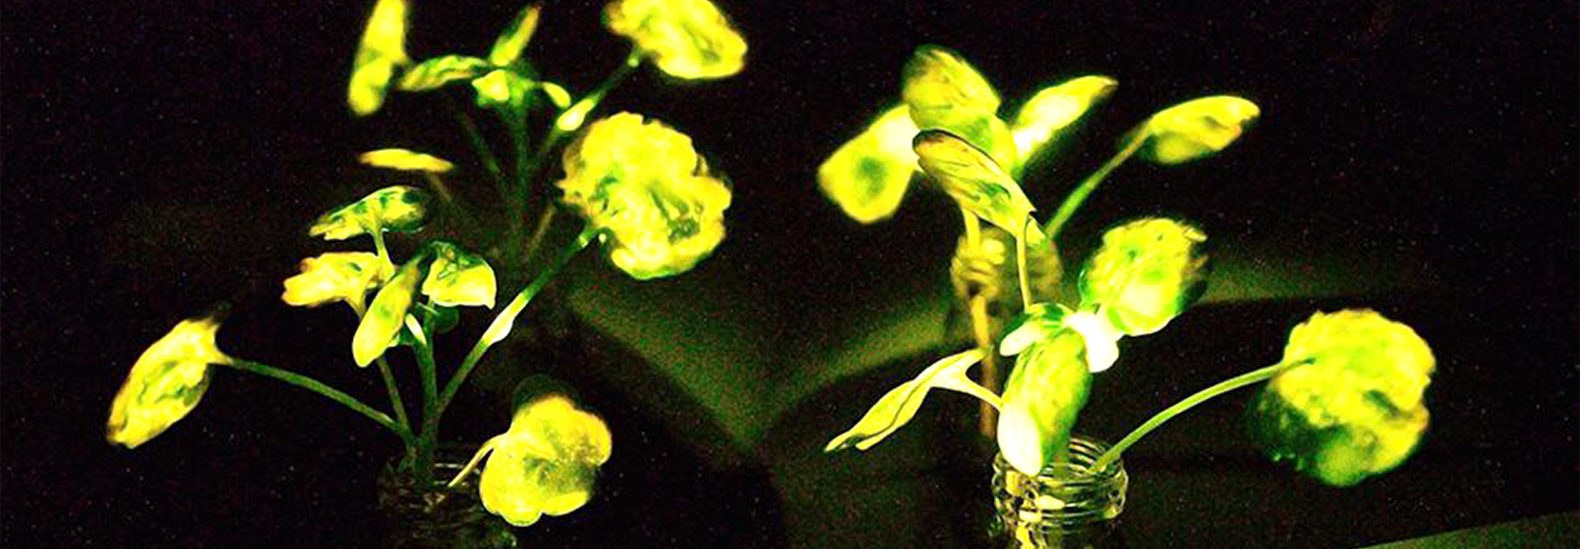 Light Up The World With Glowing Plants